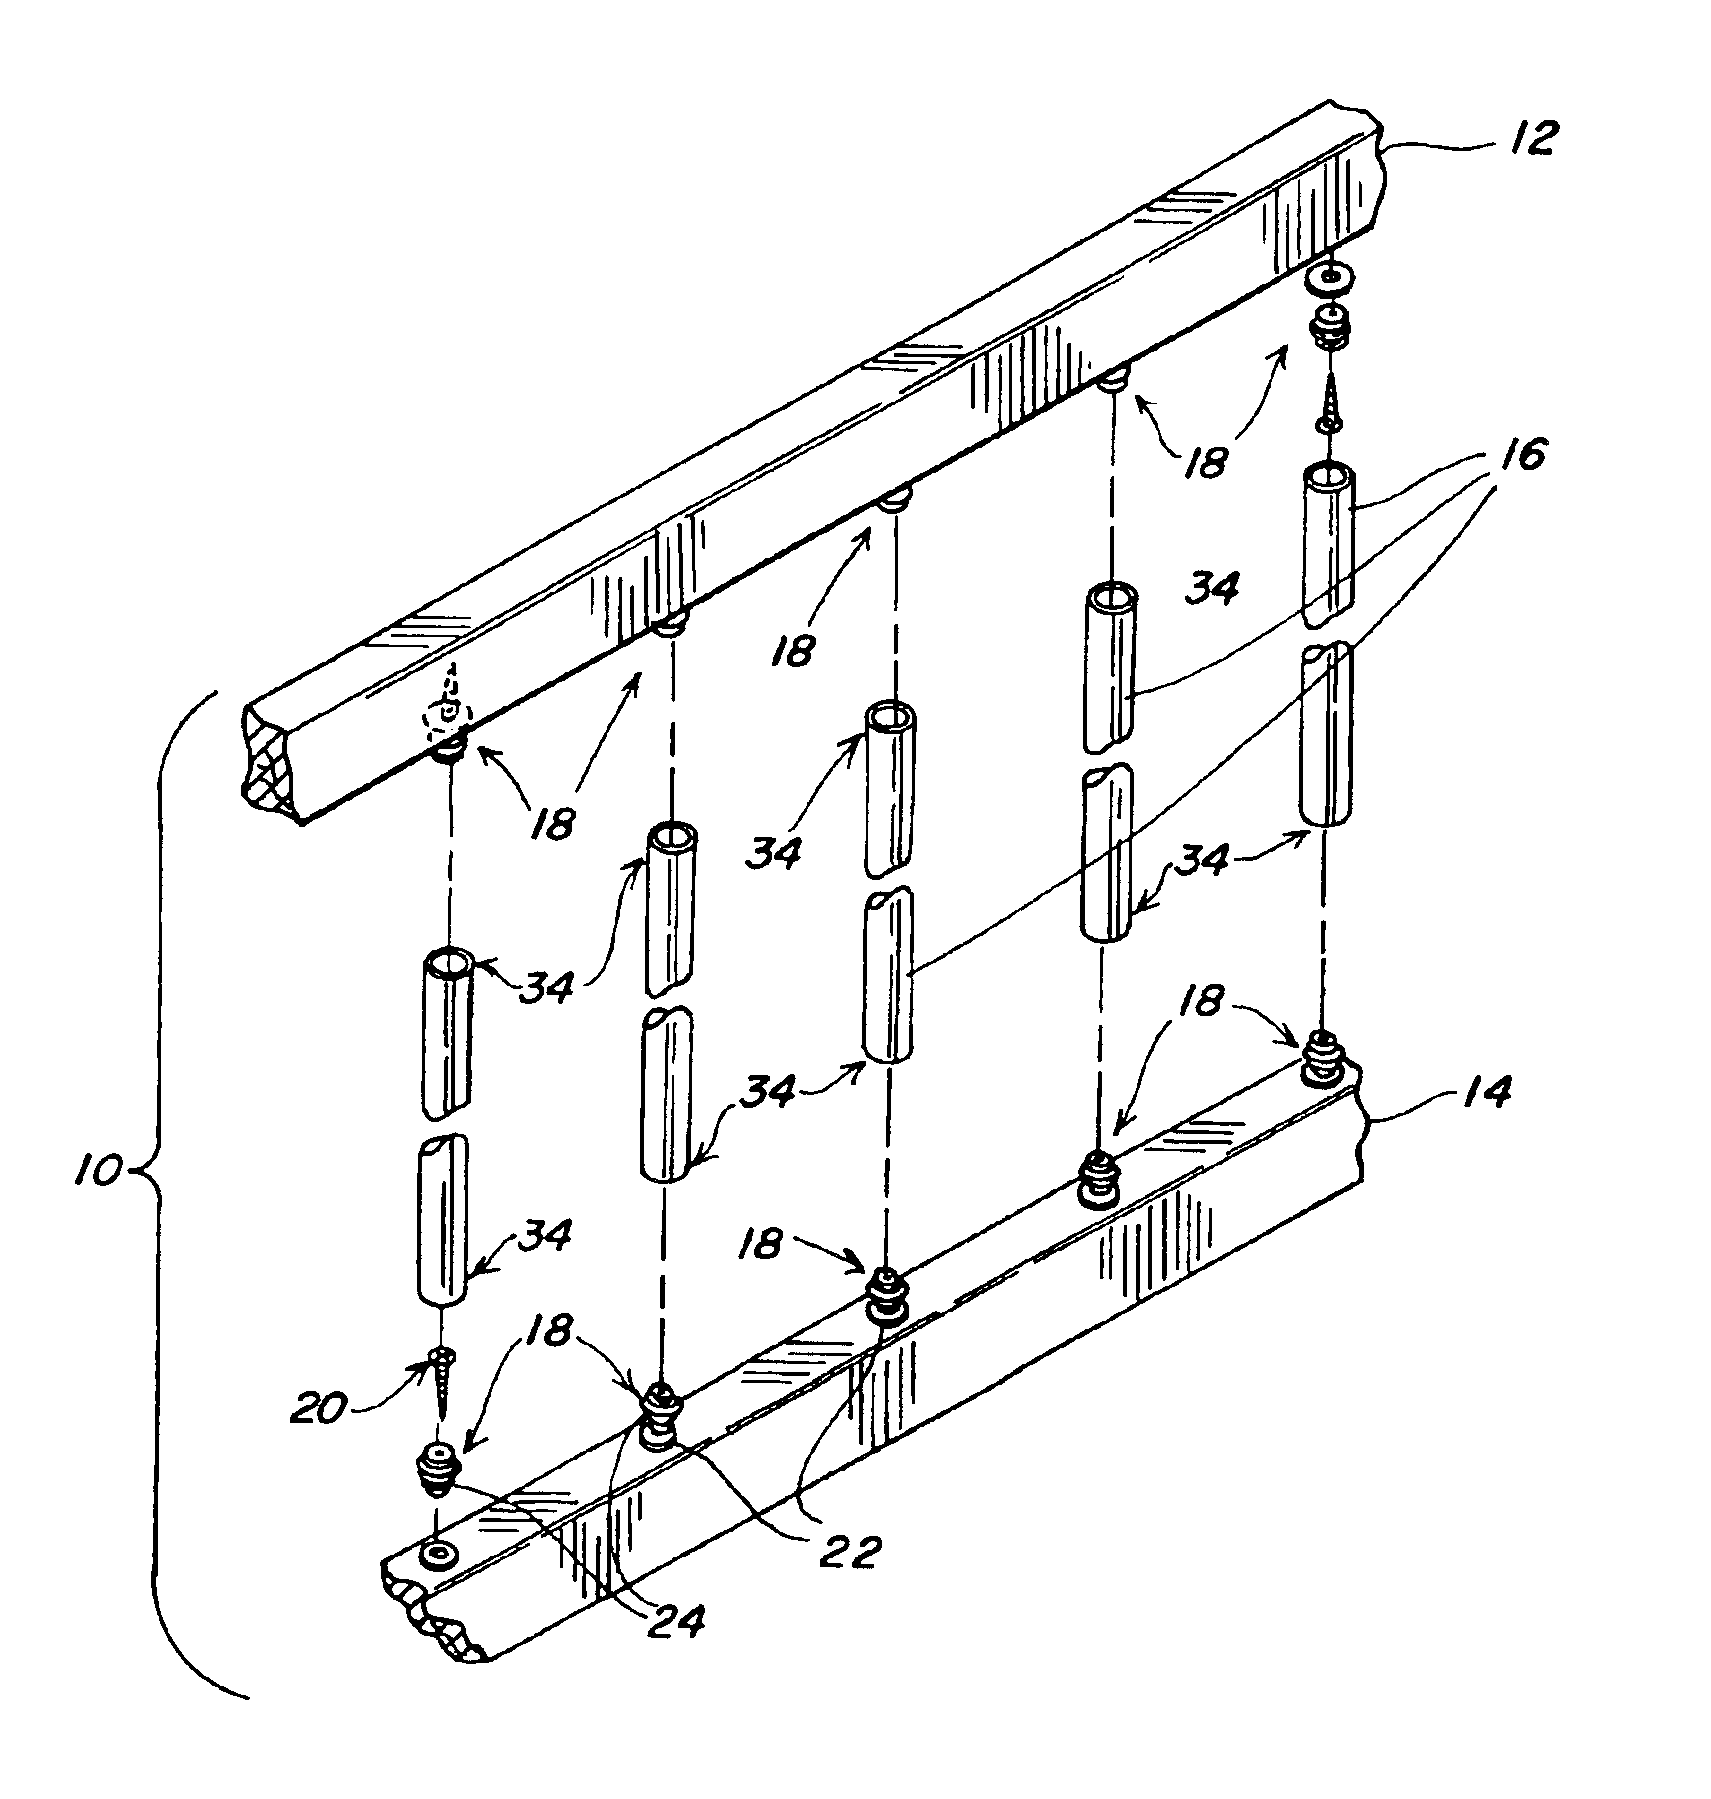 Connectors and railing system having metal balusters isolated from corrosion